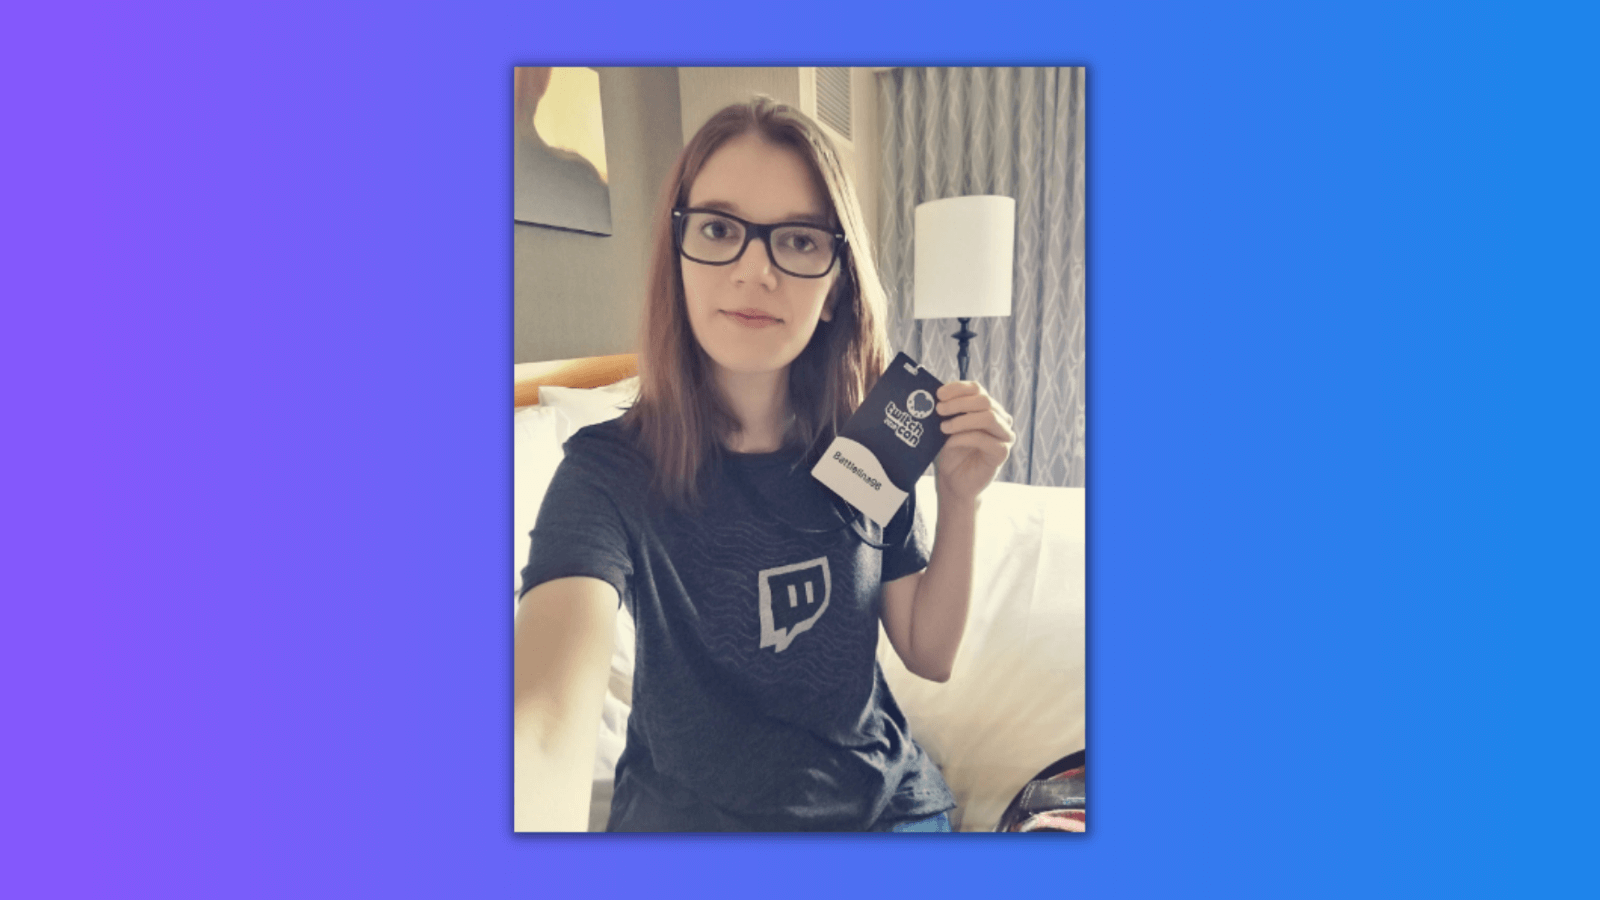 This image shows the Sound Alerts product manager Lina at TwitchCon San José